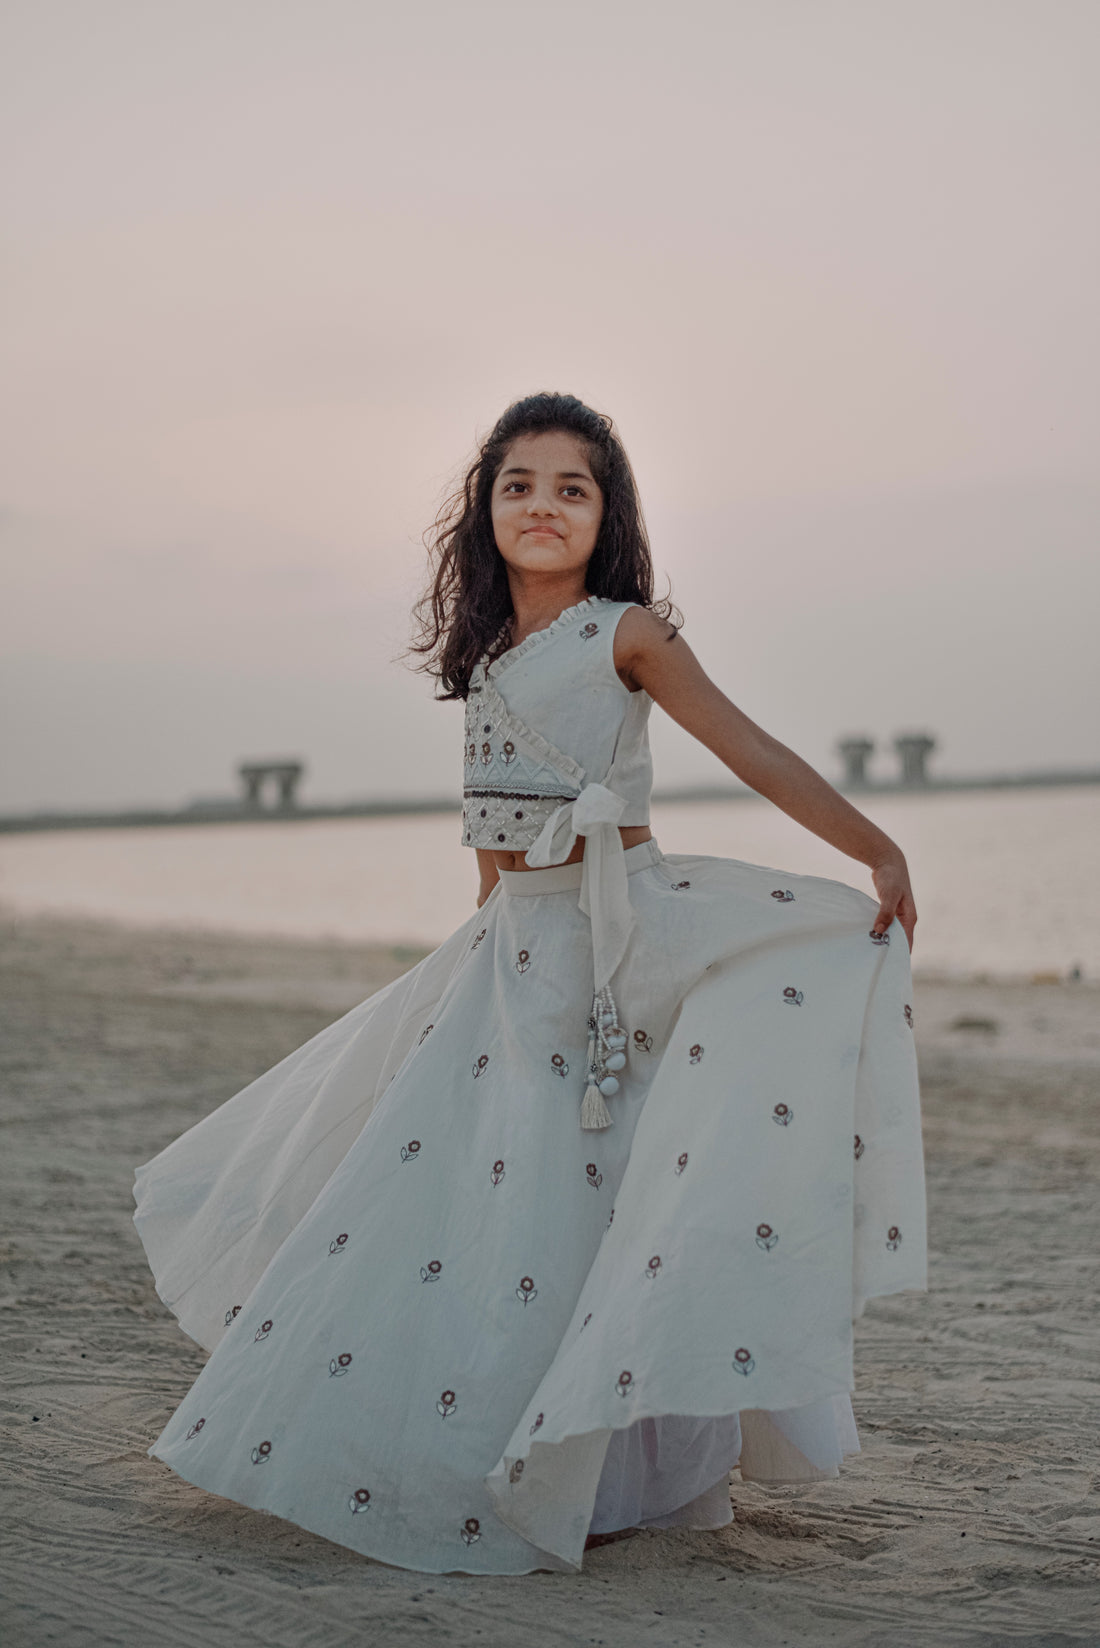 Latest 50 Crop Top and Lehenga Designs (2022) - Tips and Beauty | Long  skirt top designs, Long skirt and top, Crop top dress